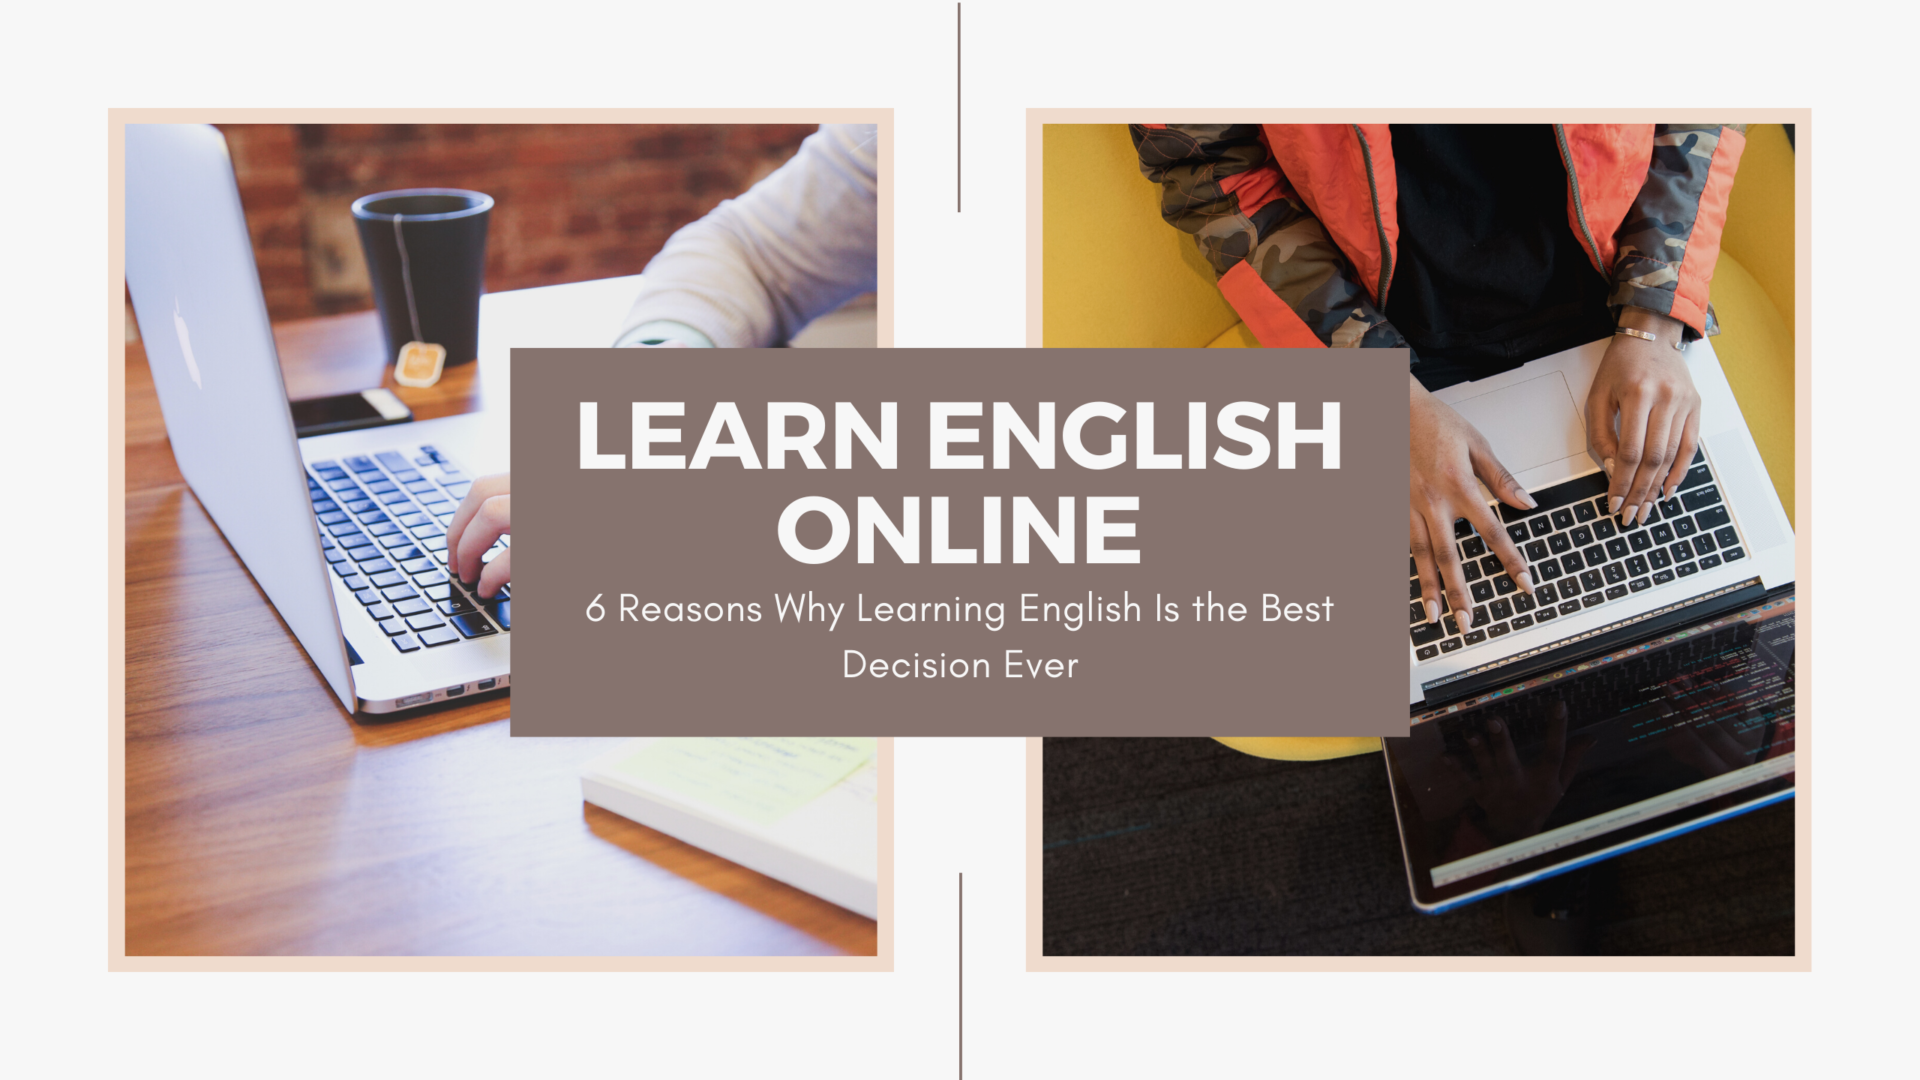 6 Reasons Why Learning English Is the Best Decision Ever